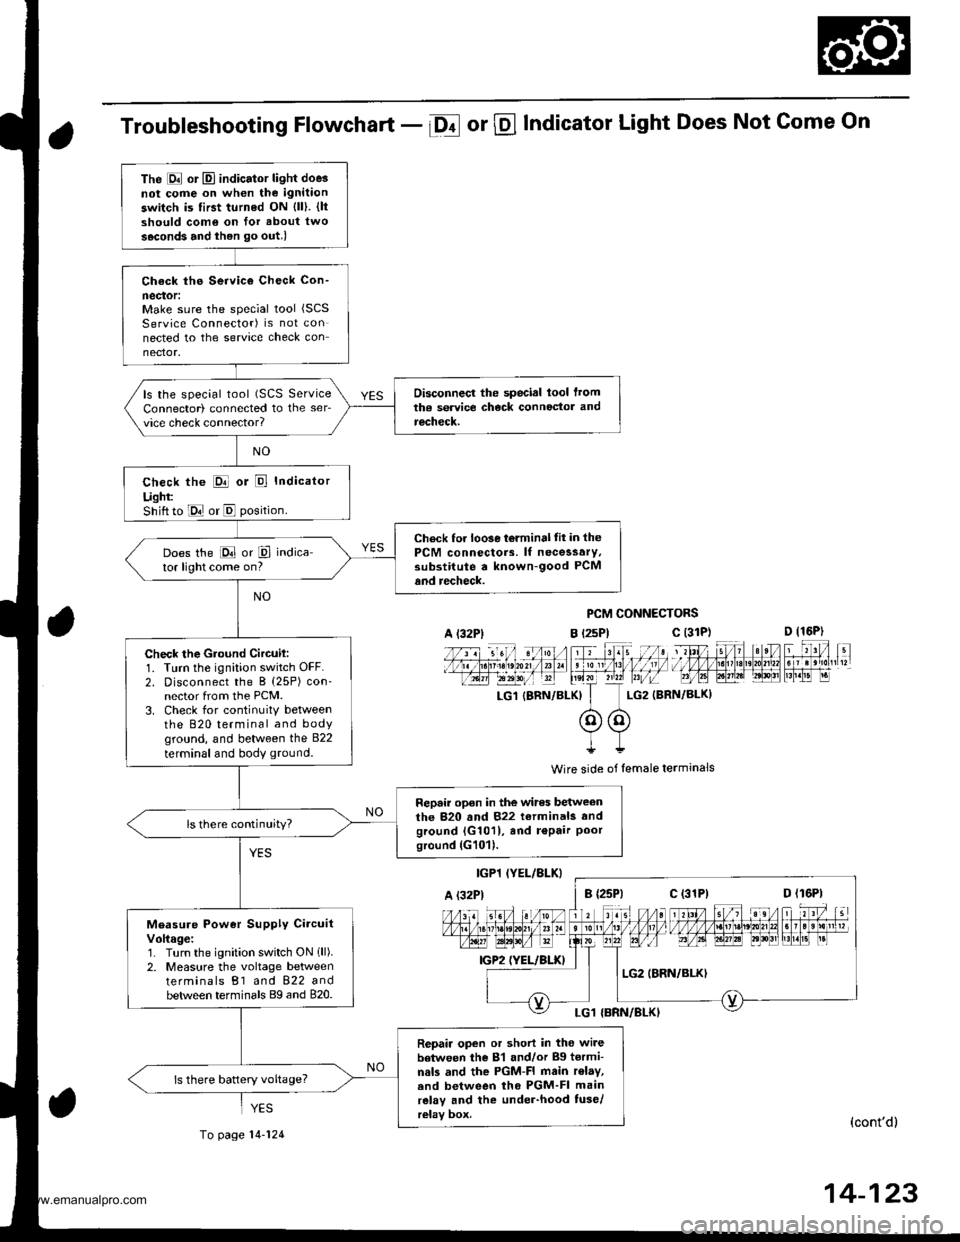 HONDA CR-V 2000 RD1-RD3 / 1.G Repair Manual 
Troubleshooting Flowchart - Df or @ Indicator Light Does Not Come On
PCM CONNECTORS
B t2sPl c (31D (16P)
l*f4tr 8-
f - -- -6 3 rol ,: irr t lrpri$fe?0?r/a)1 e oI 13 11/ / l//|rrr I , ltelx ?r2? r,/i